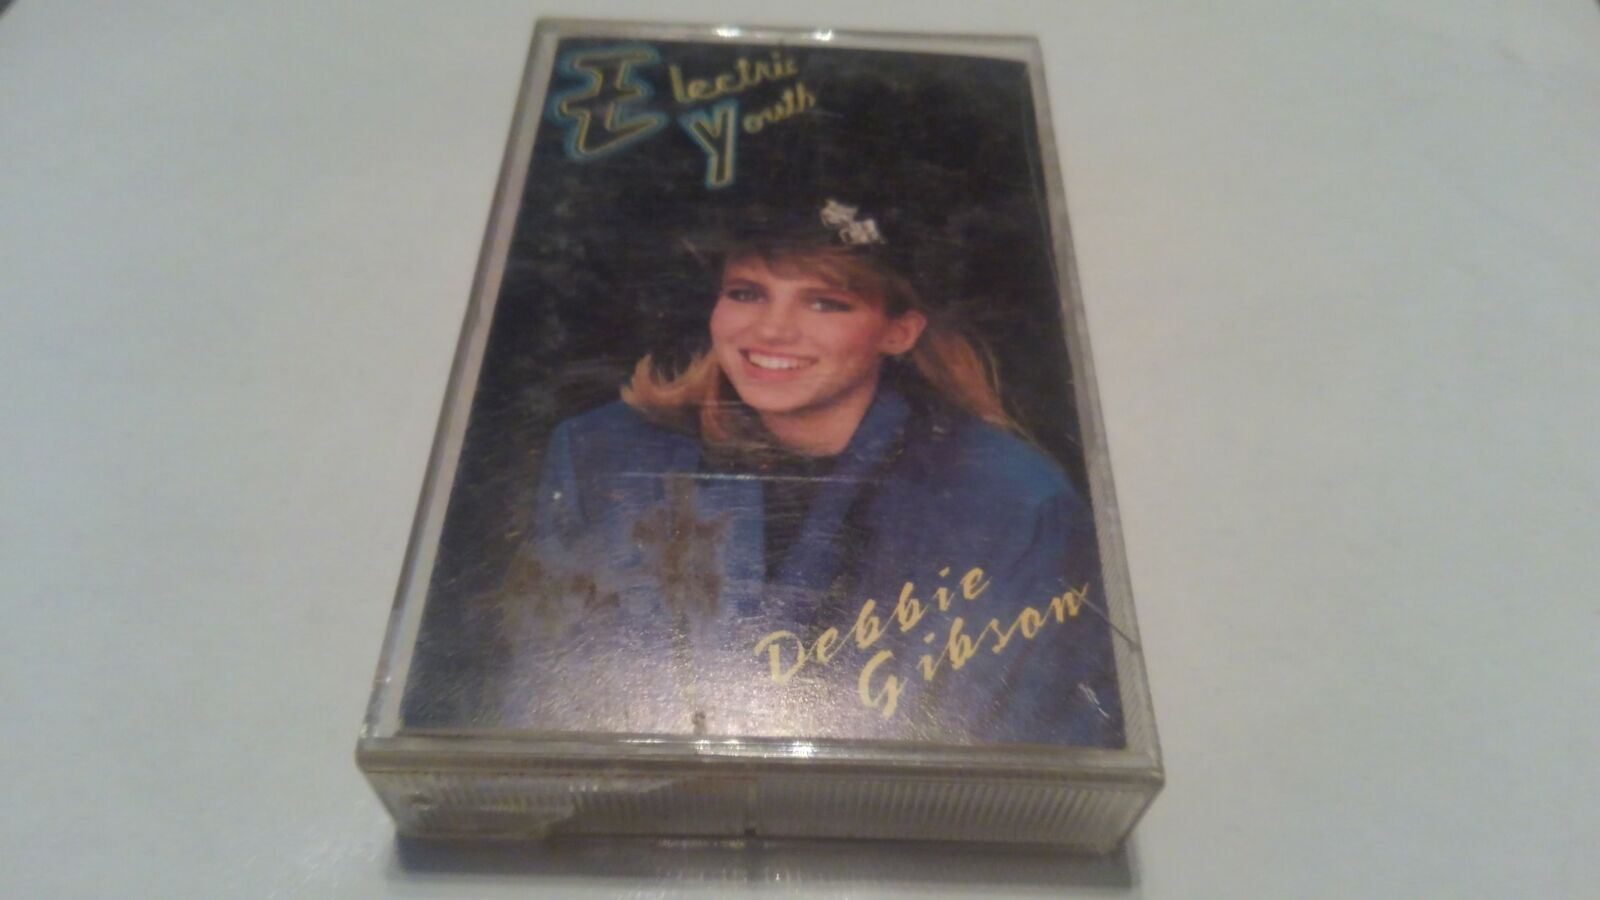 Debbie Gibson Electric Youth Cassette Tape 1989 Vintage Pop Rock Music